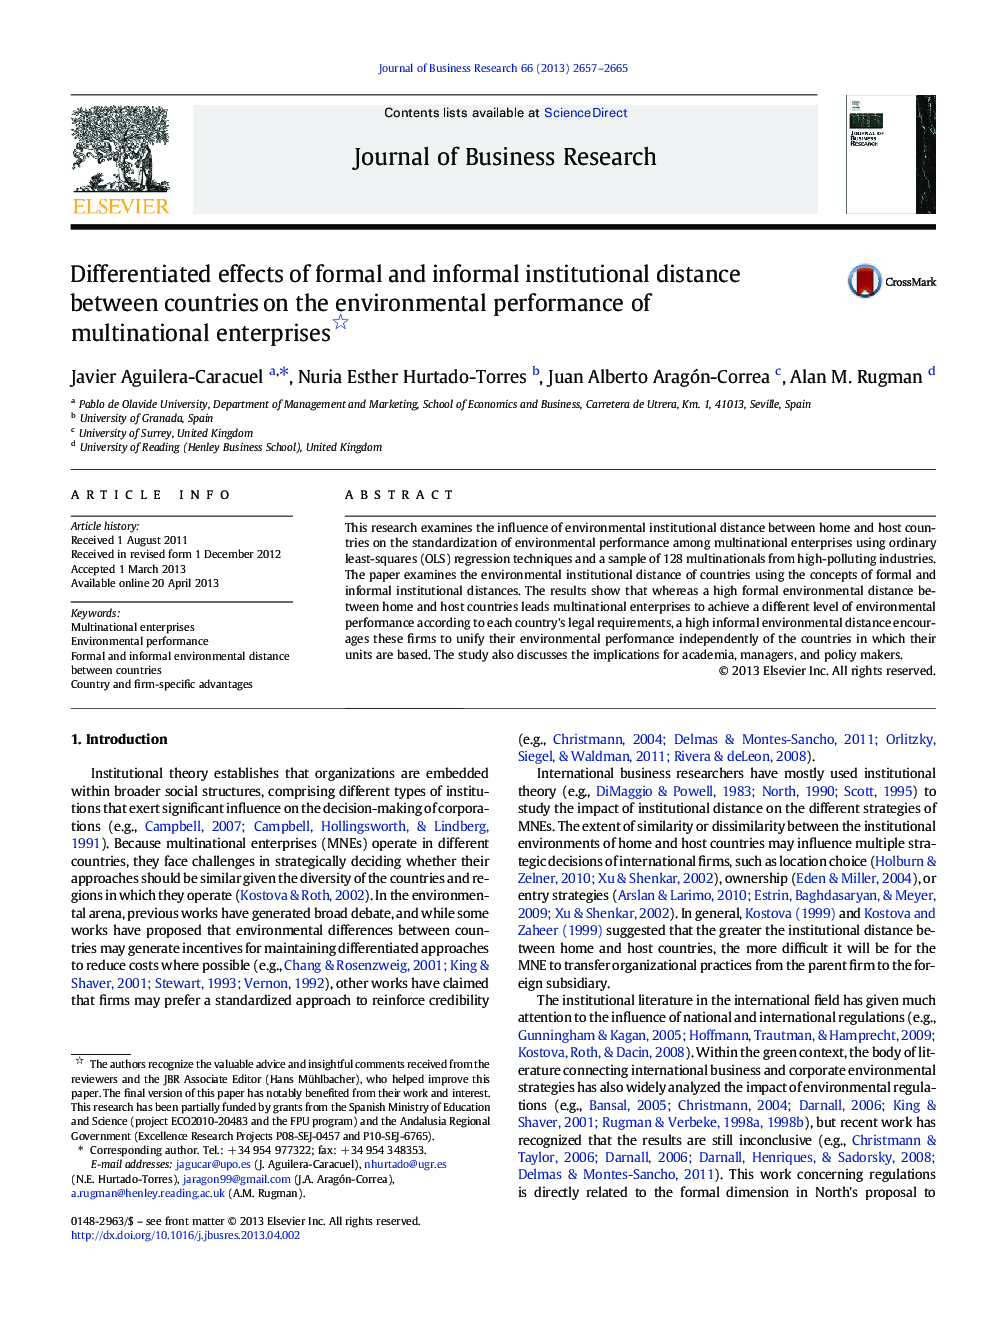 Differentiated effects of formal and informal institutional distance between countries on the environmental performance of multinational enterprises 